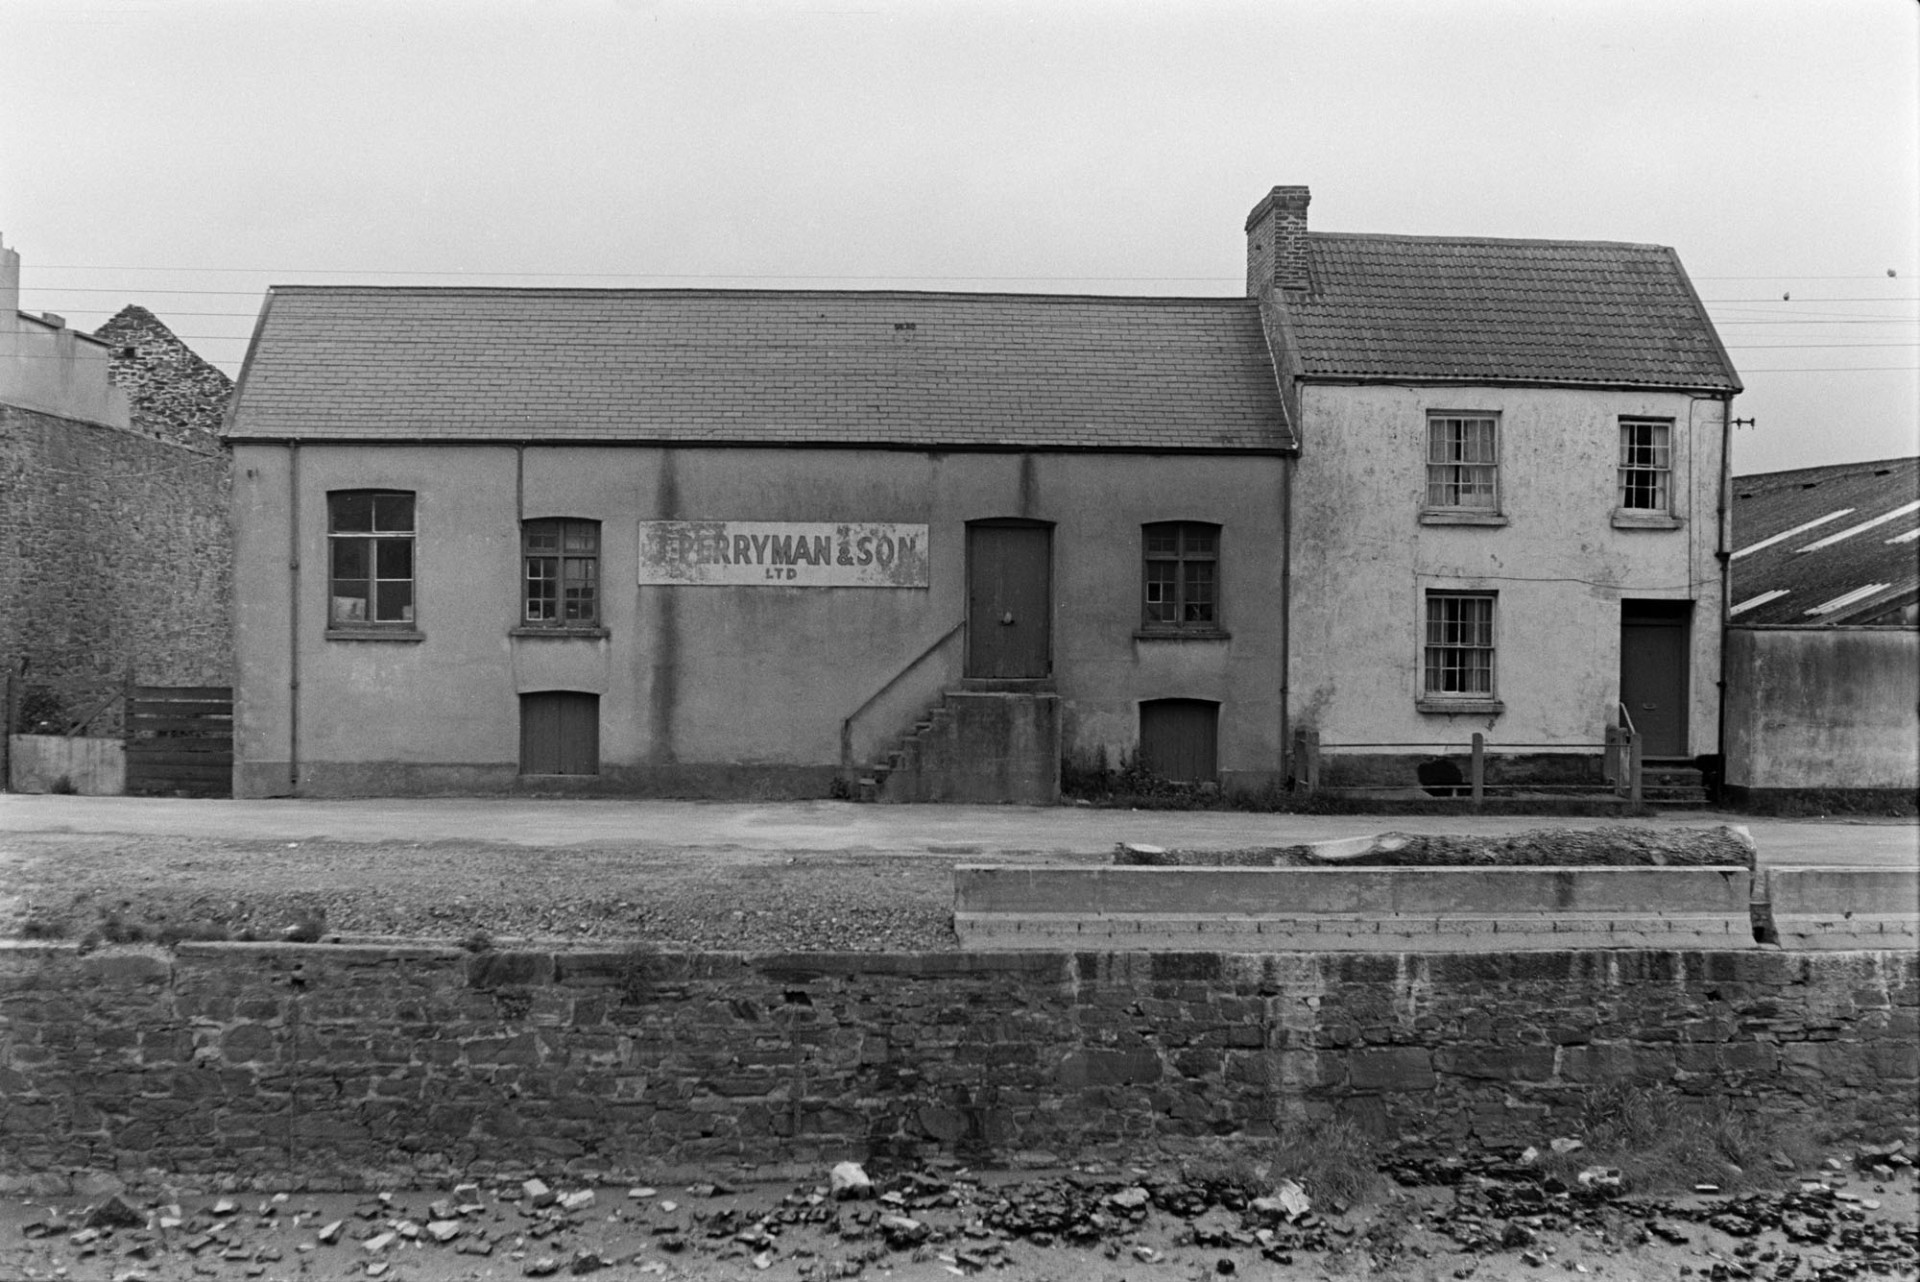 The premises of 'J Perryman & Son' on the banks of the River Taw at Barnstaple. It is possibly a warehouse of some kind.